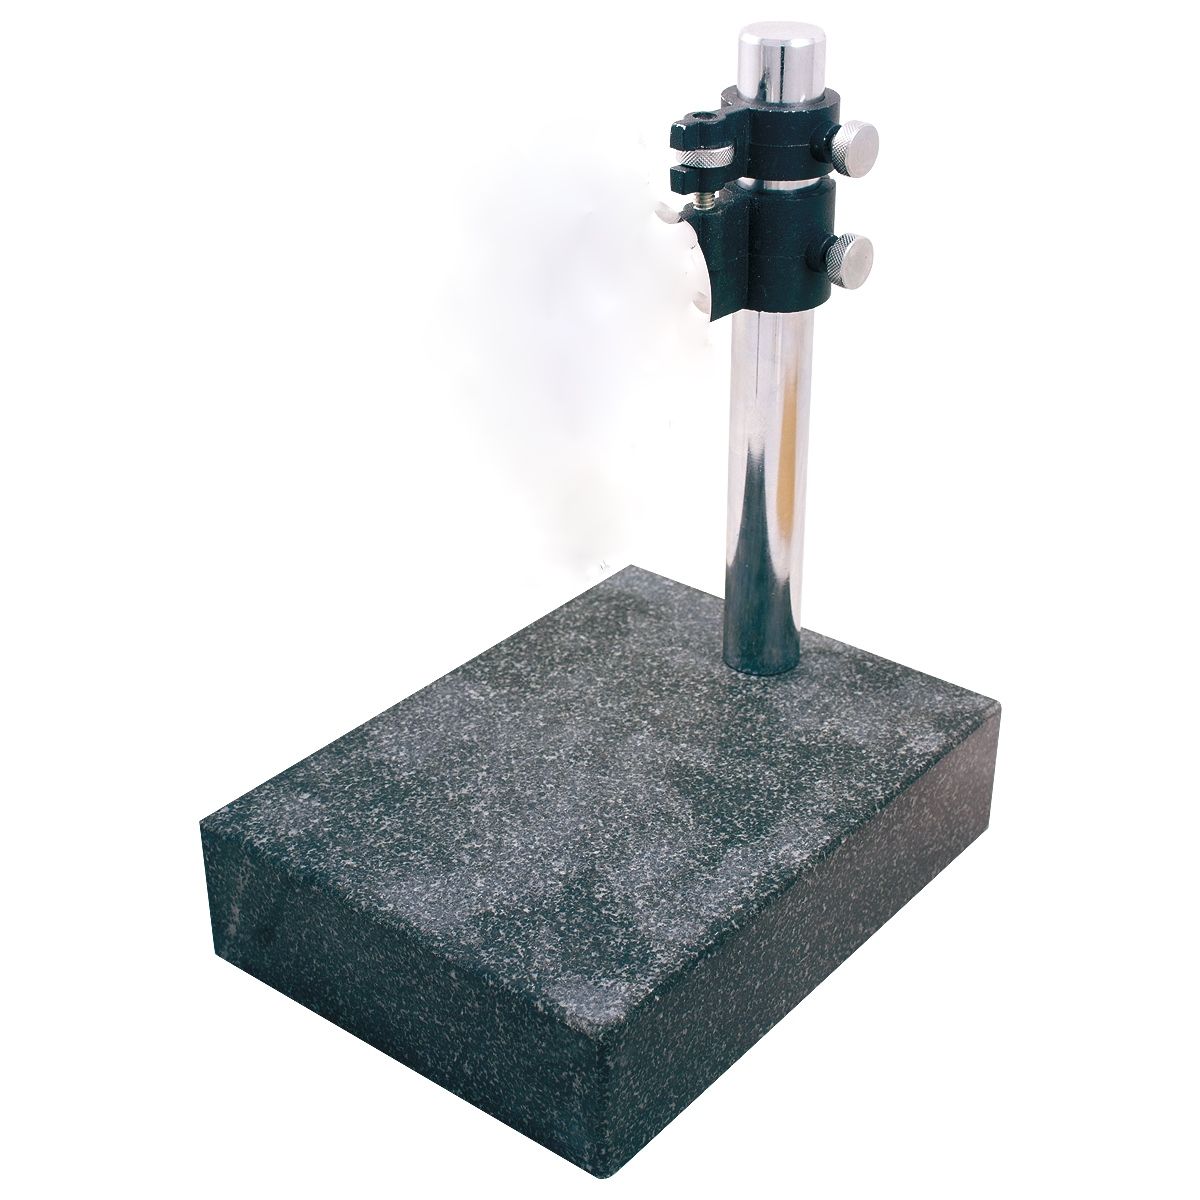 GRANITE CHECK STAND WITH 1" DIAL INDICATOR (4401-2001)